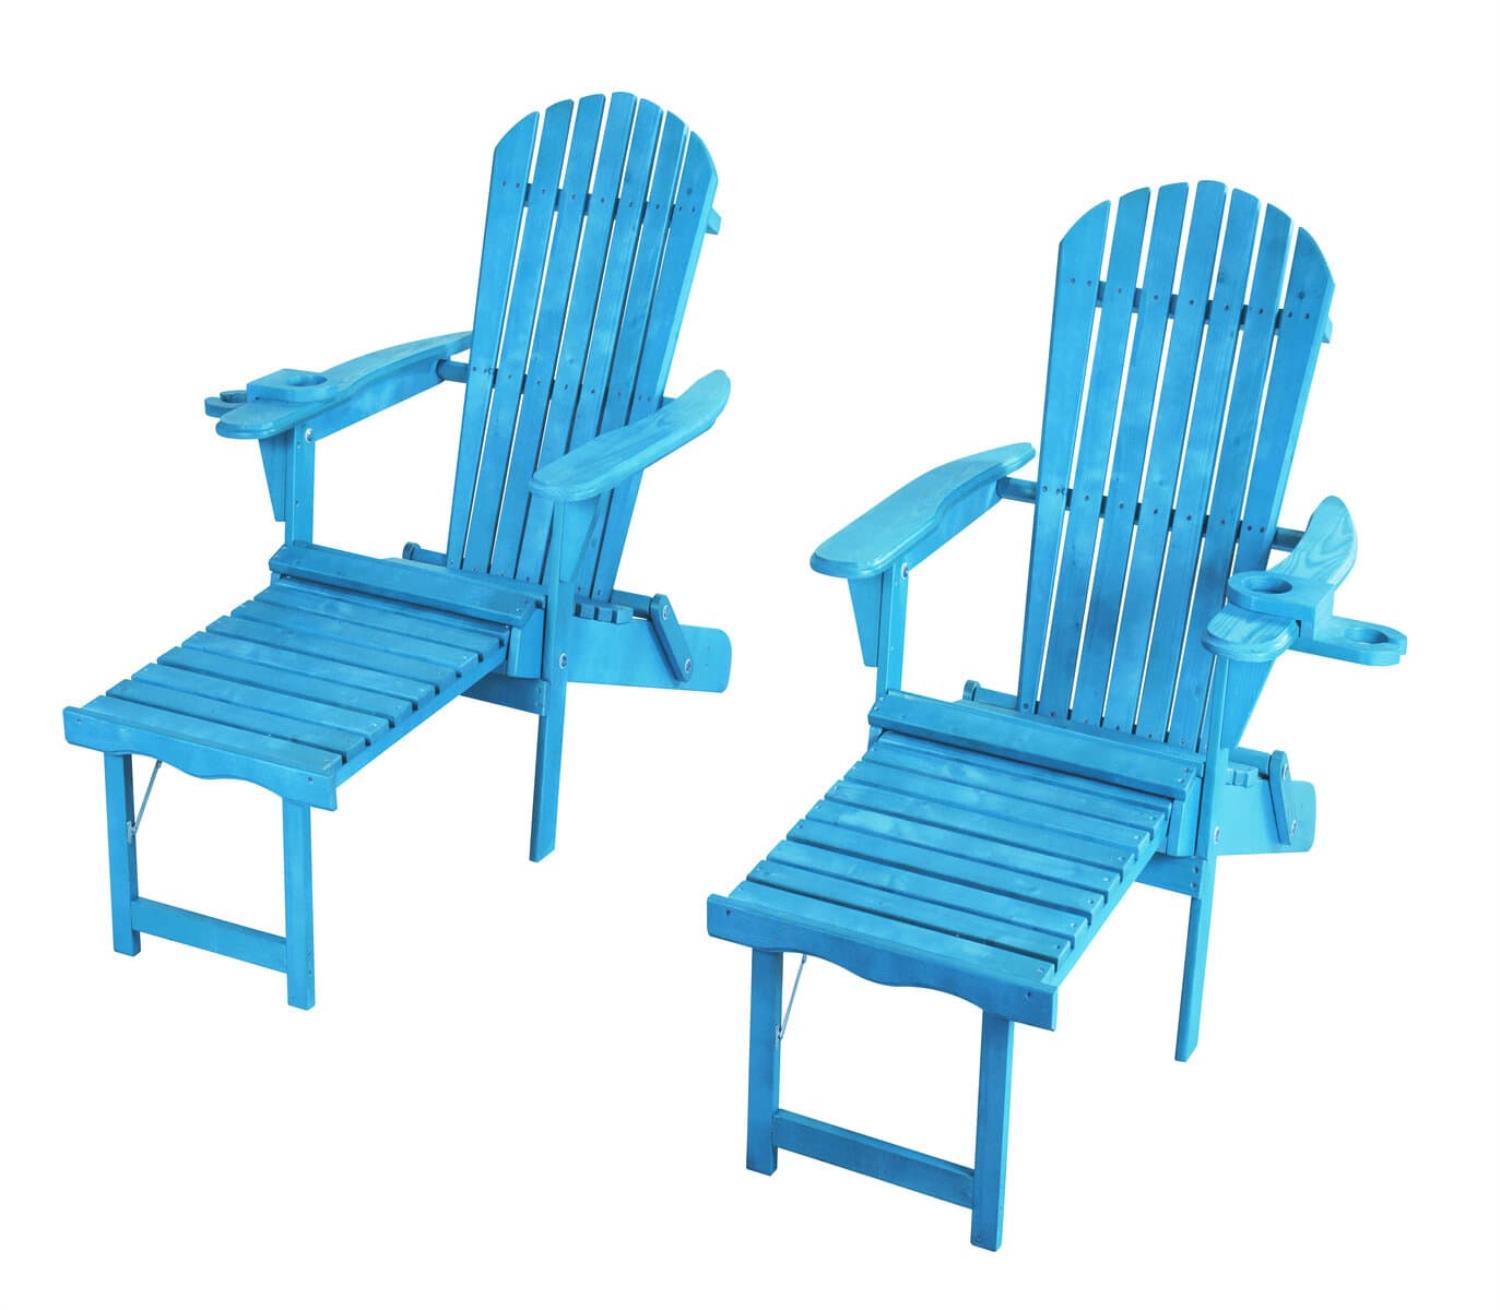 W Unlimited  Oceanic Adirondack Chaise Foldable Lounge Chair Set with Cup & Glass Holder, Sky Blue - Set of 2 - image 2 of 3